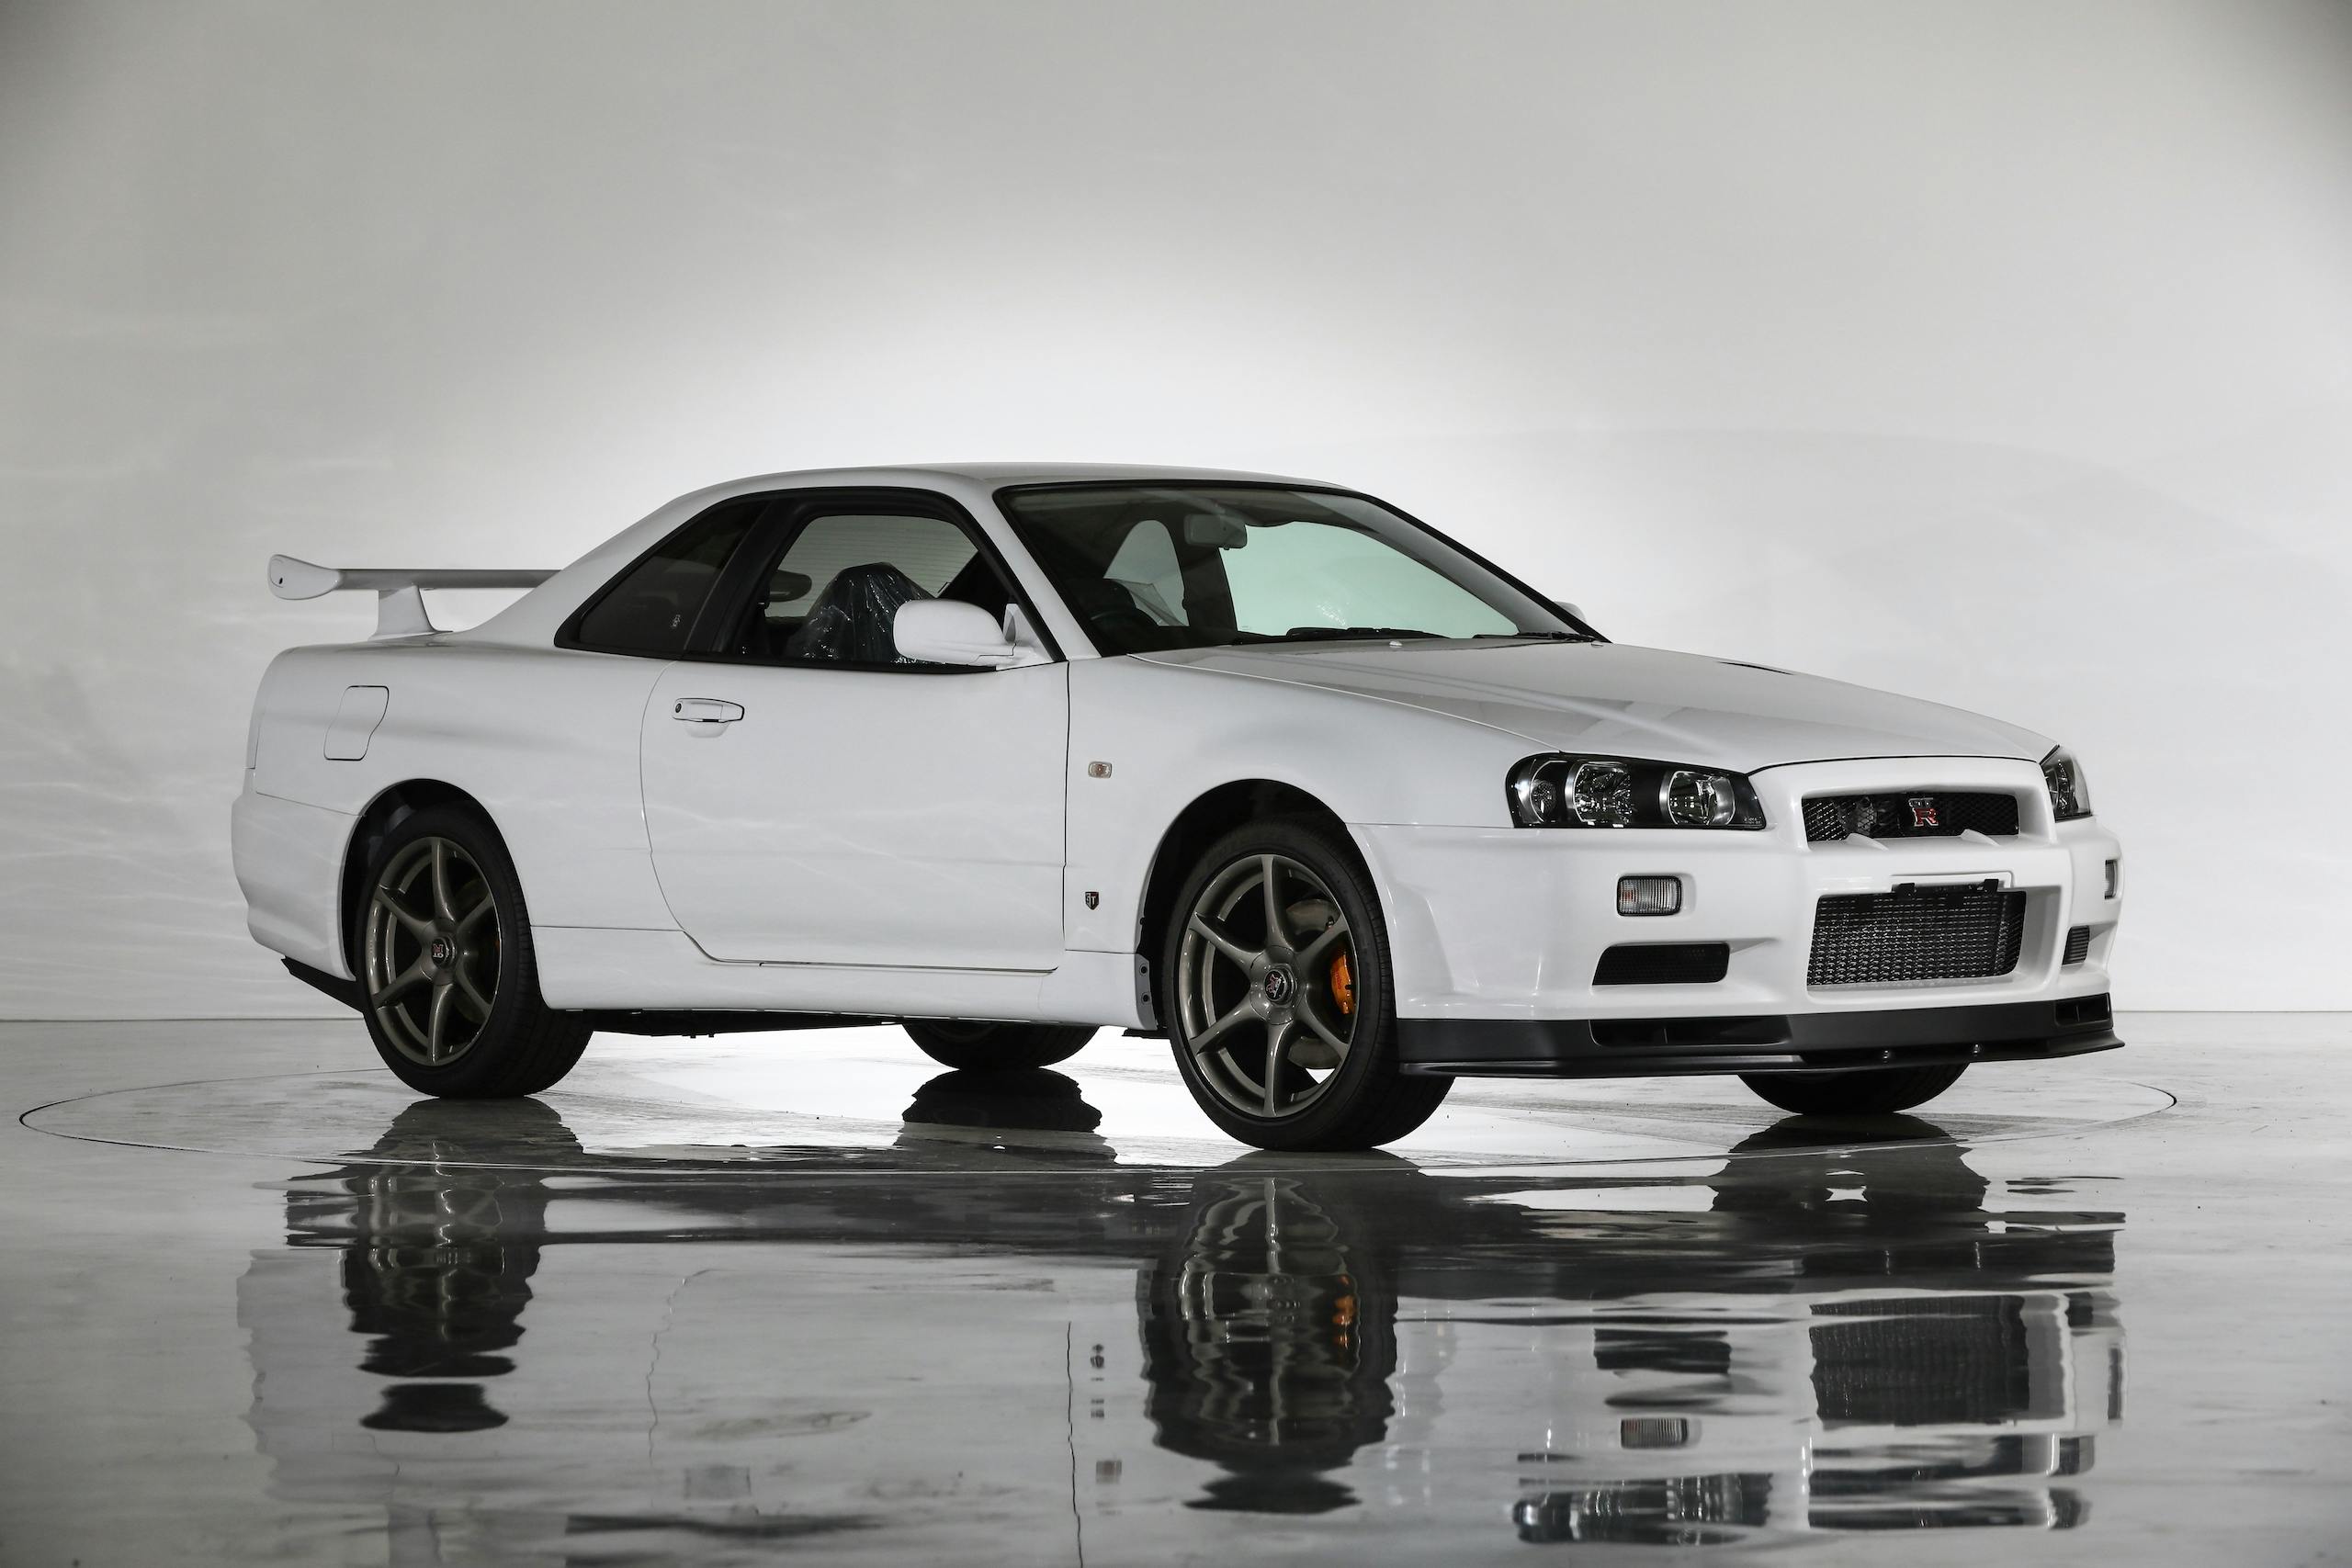 This 10-km R34 Skyline GT-R is set to test the upper end of the JDM market  - Hagerty Media